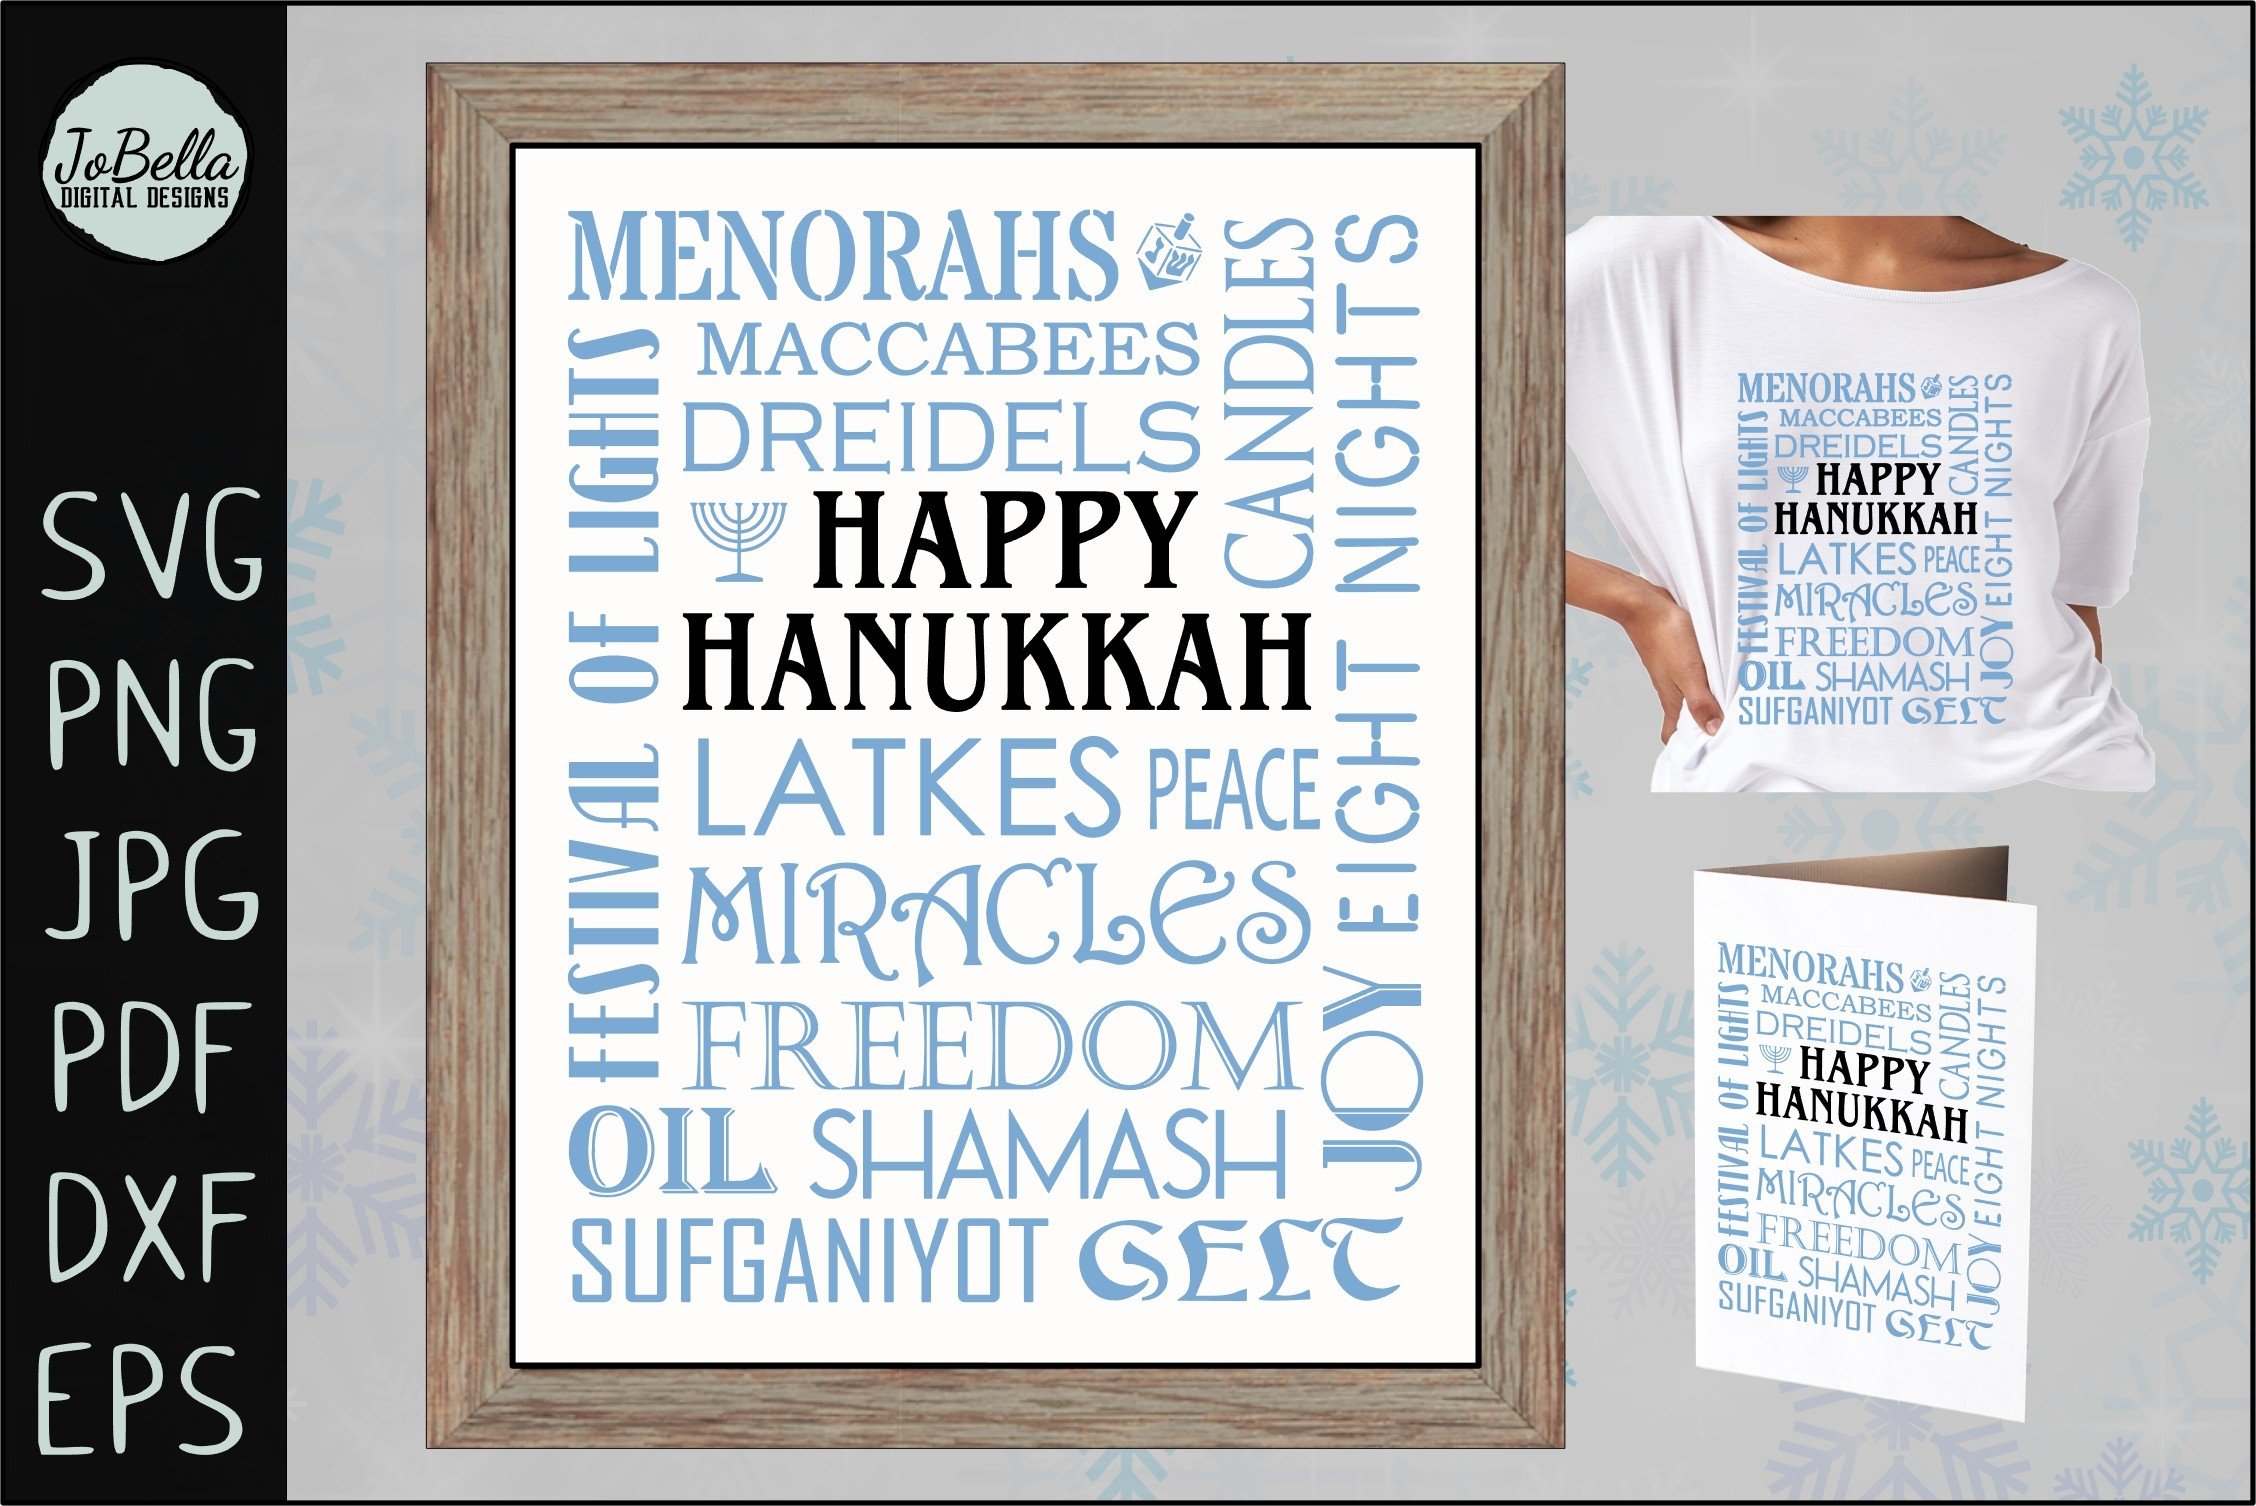 The black lettering "Happy Hanukkah" on a white background with light blue letterings.